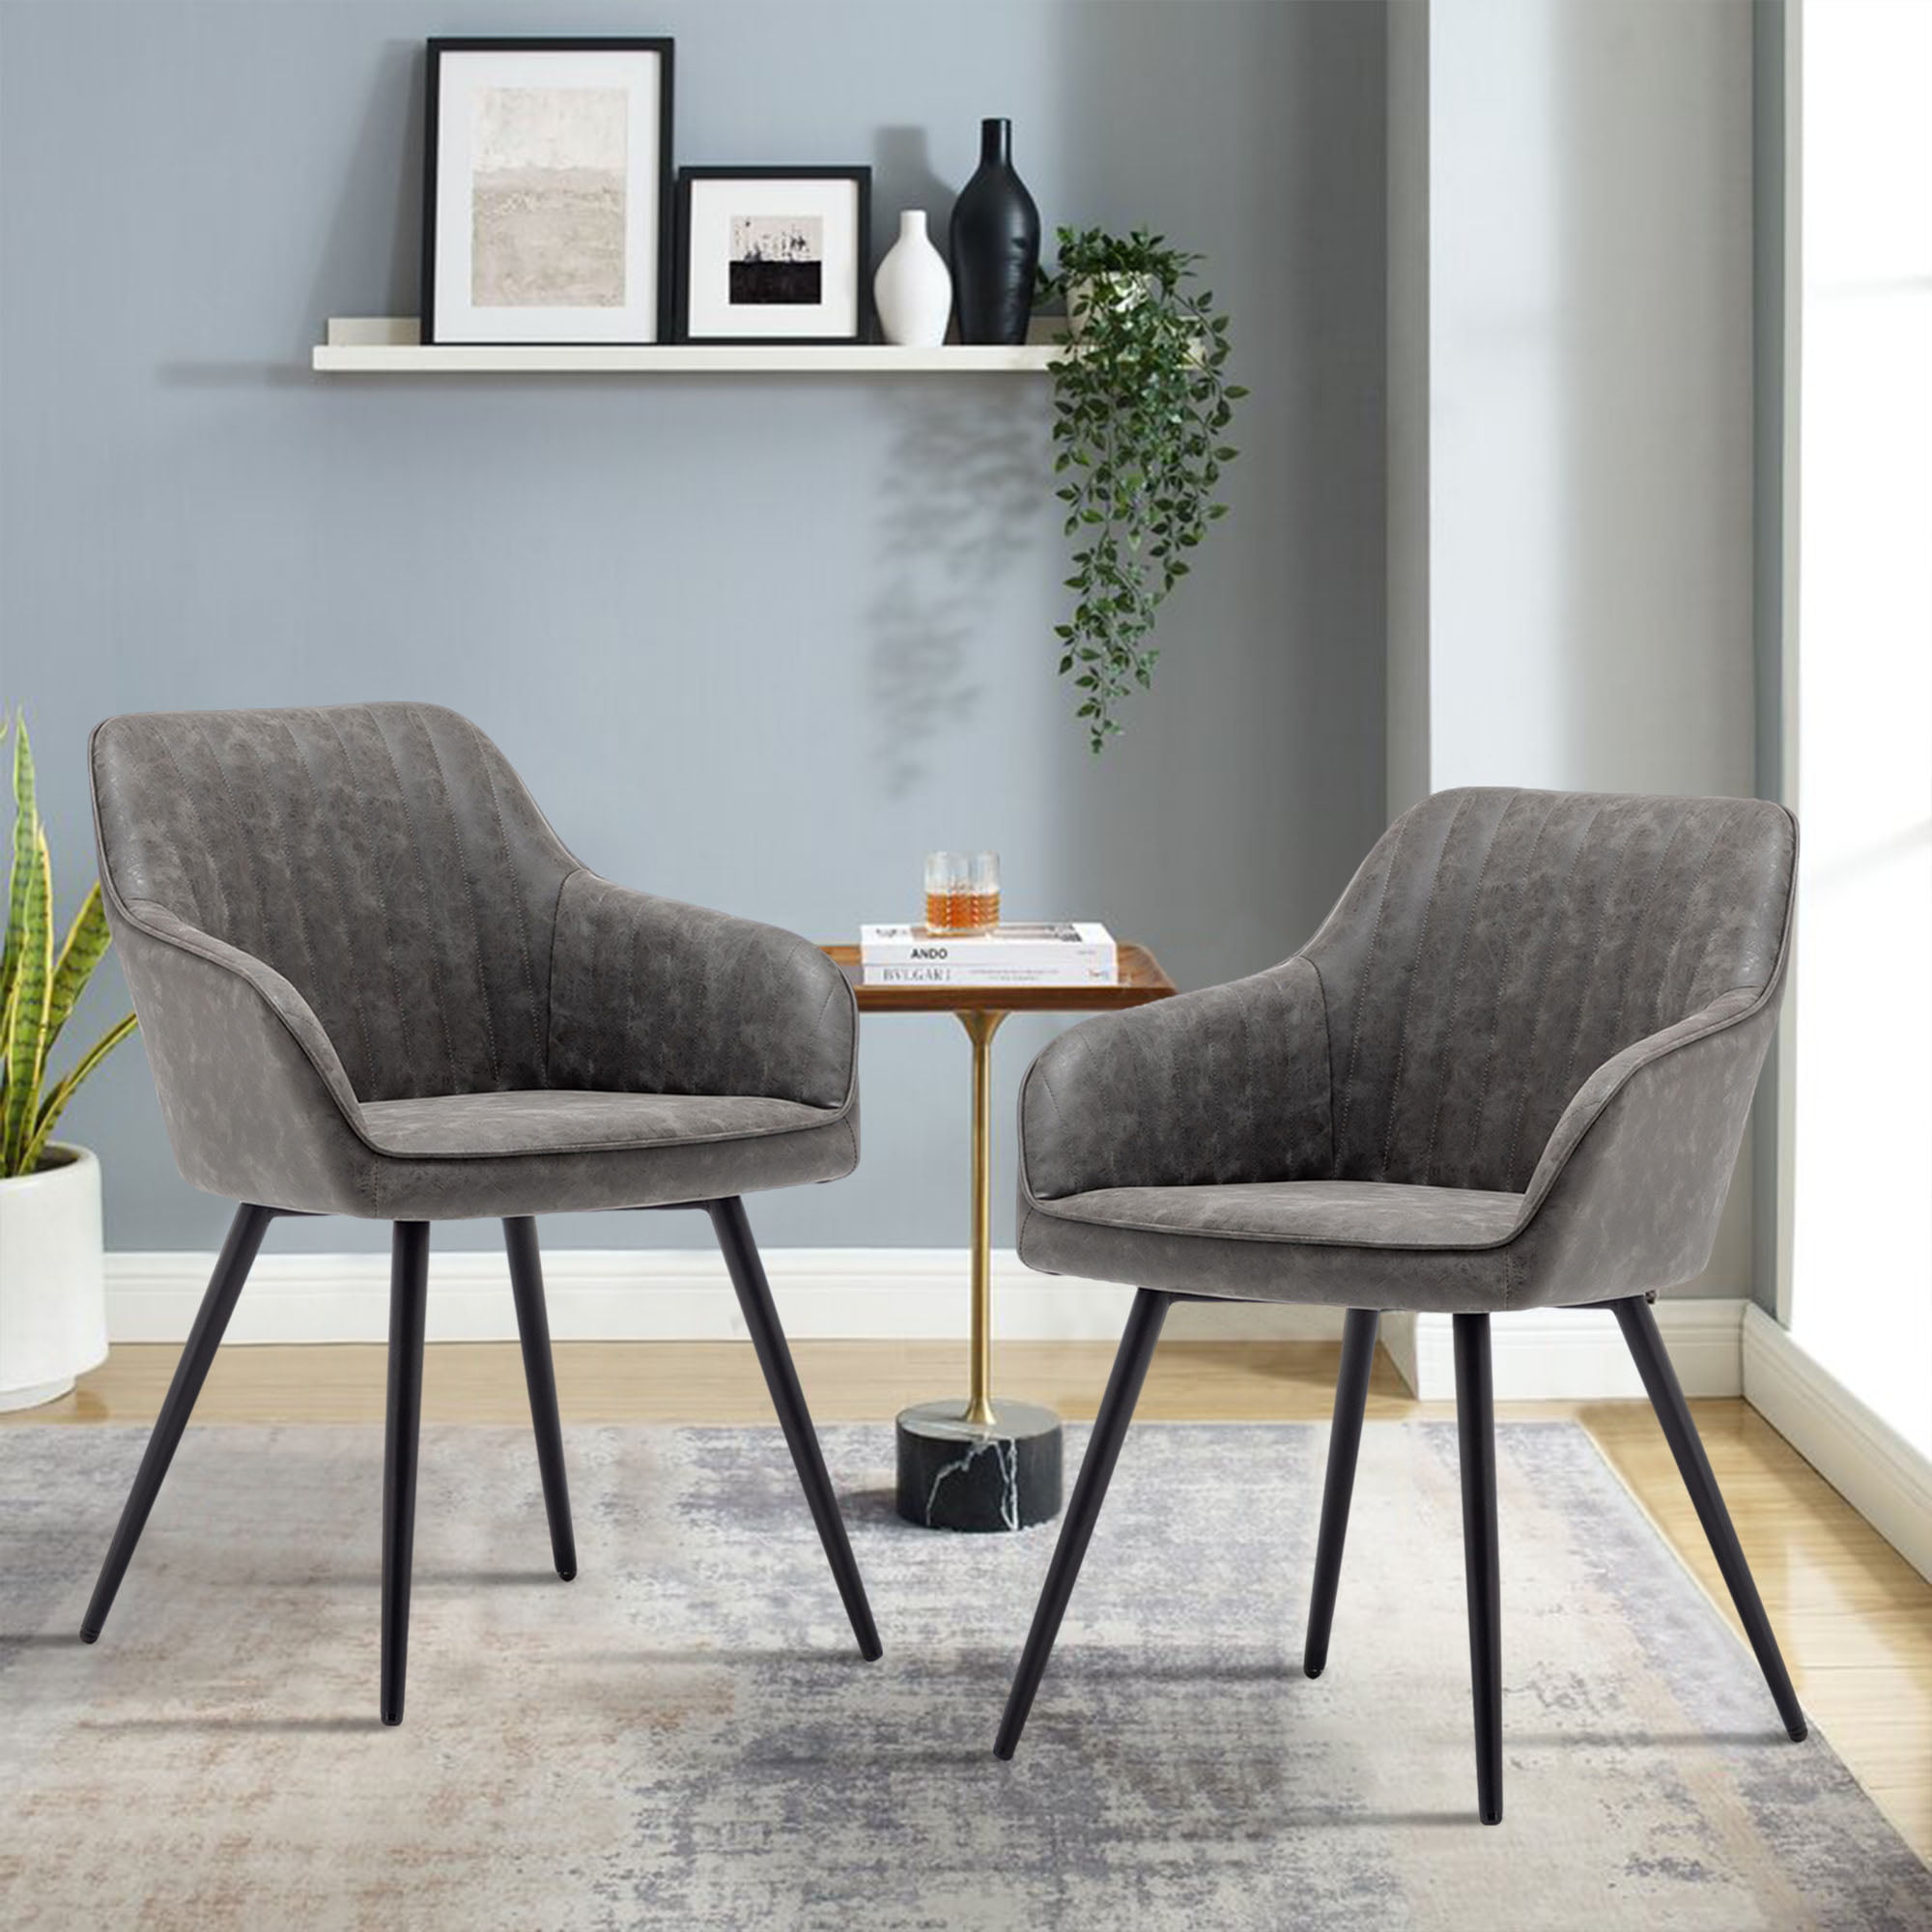 Office Cafe Set Dining with (Grey) Andeworld of Faux for Home Leather Legs Room Kitchen Arm Chairs Bistro 2, Metal Living Accent Chairs